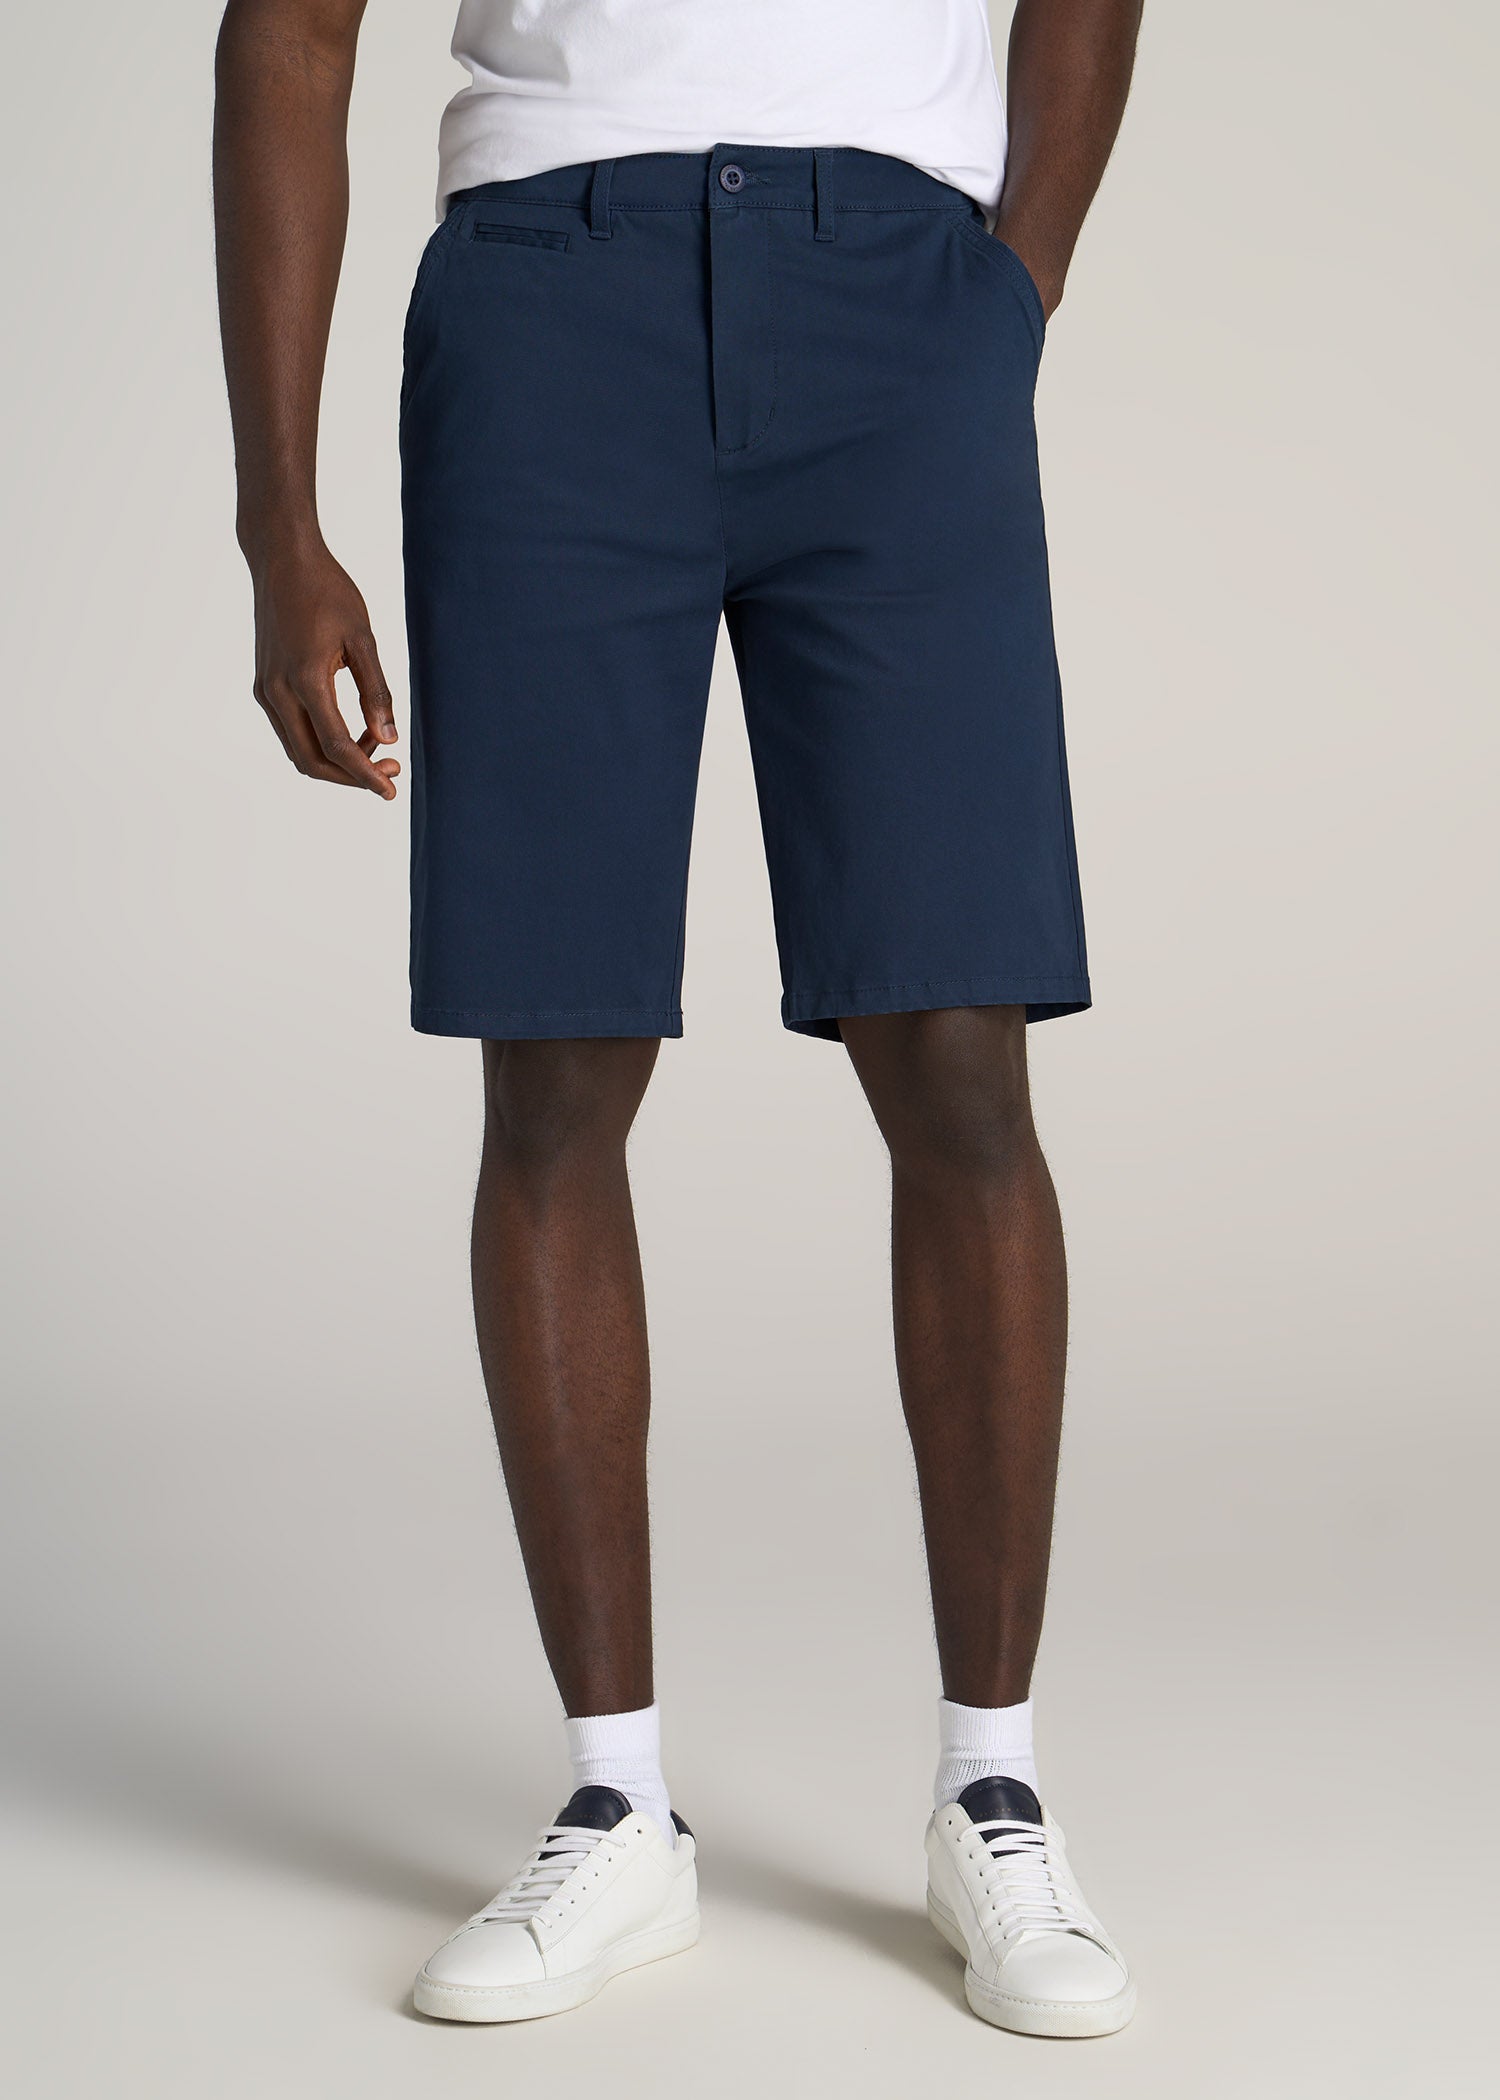 chinos shorts for men